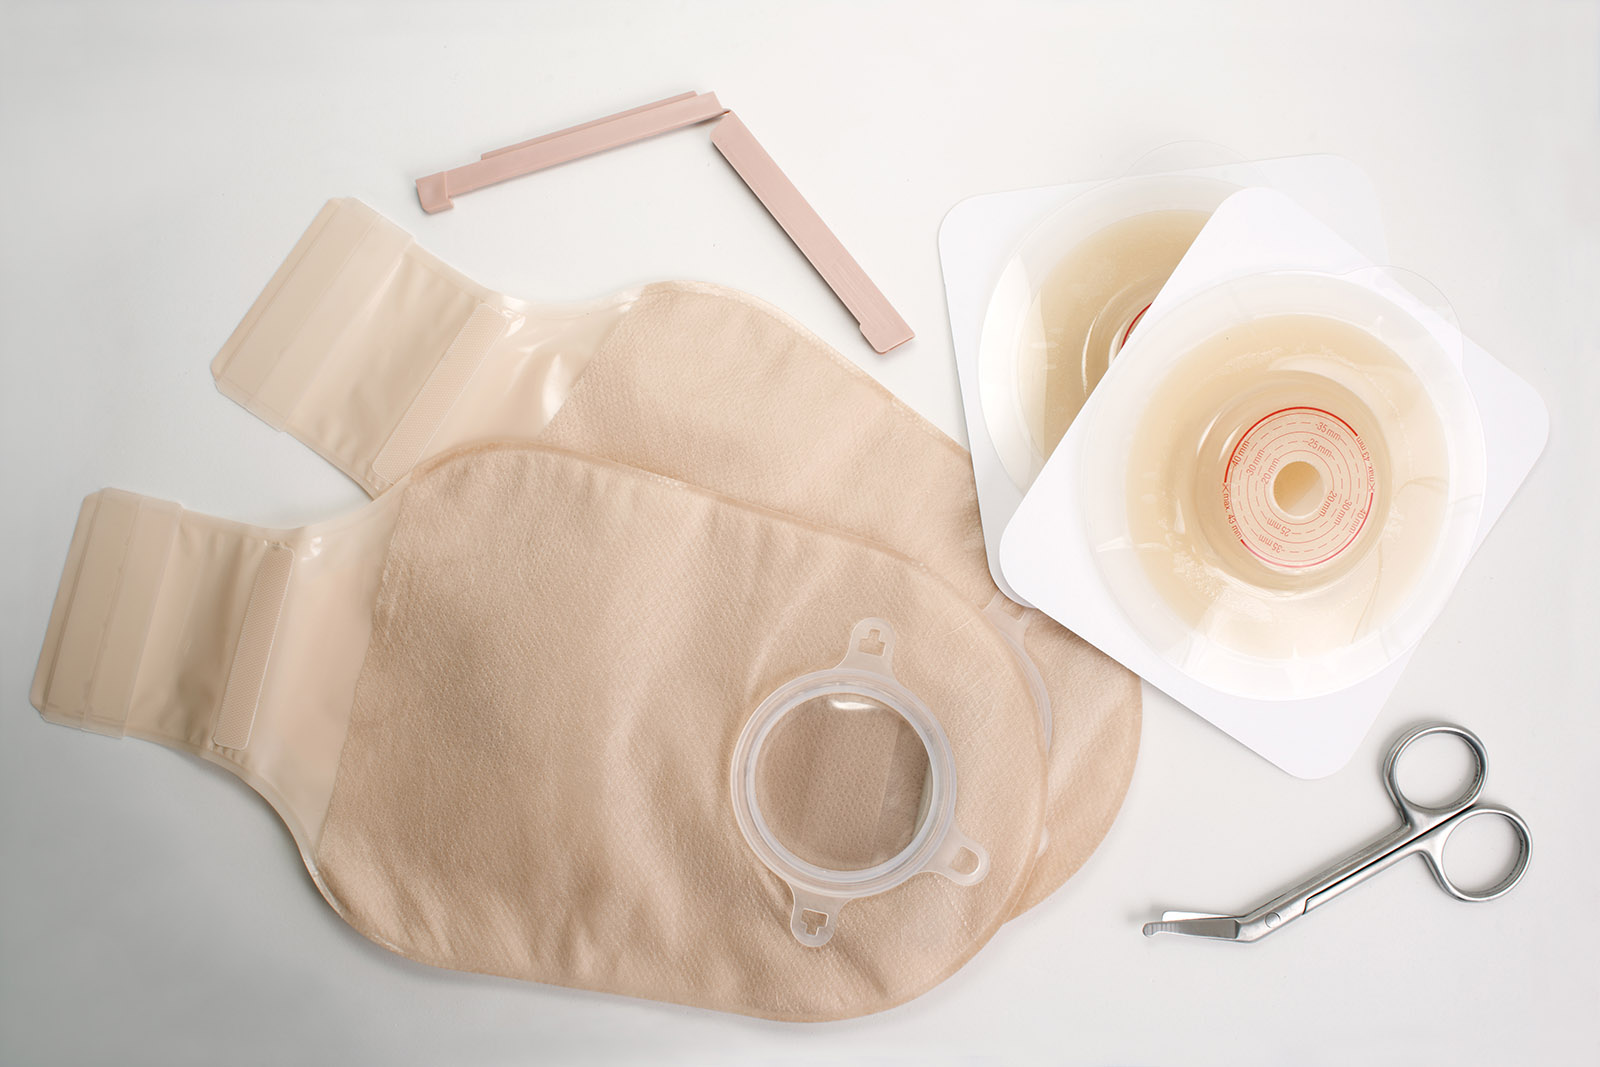 Stoma Bags & Ostomy Products